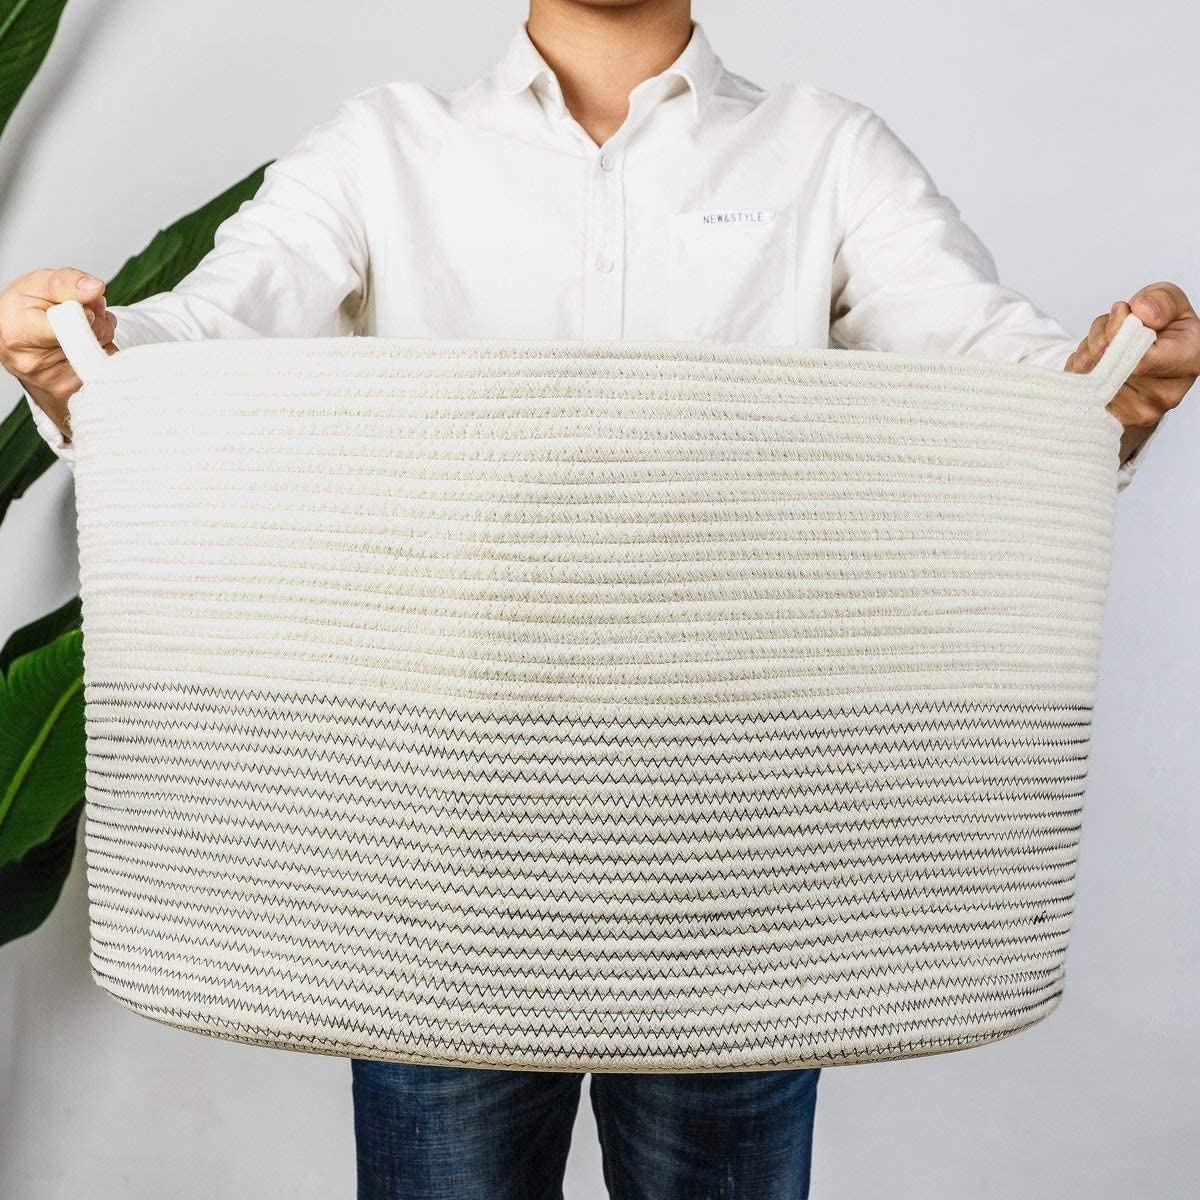 A person holding up an oversized rope basket